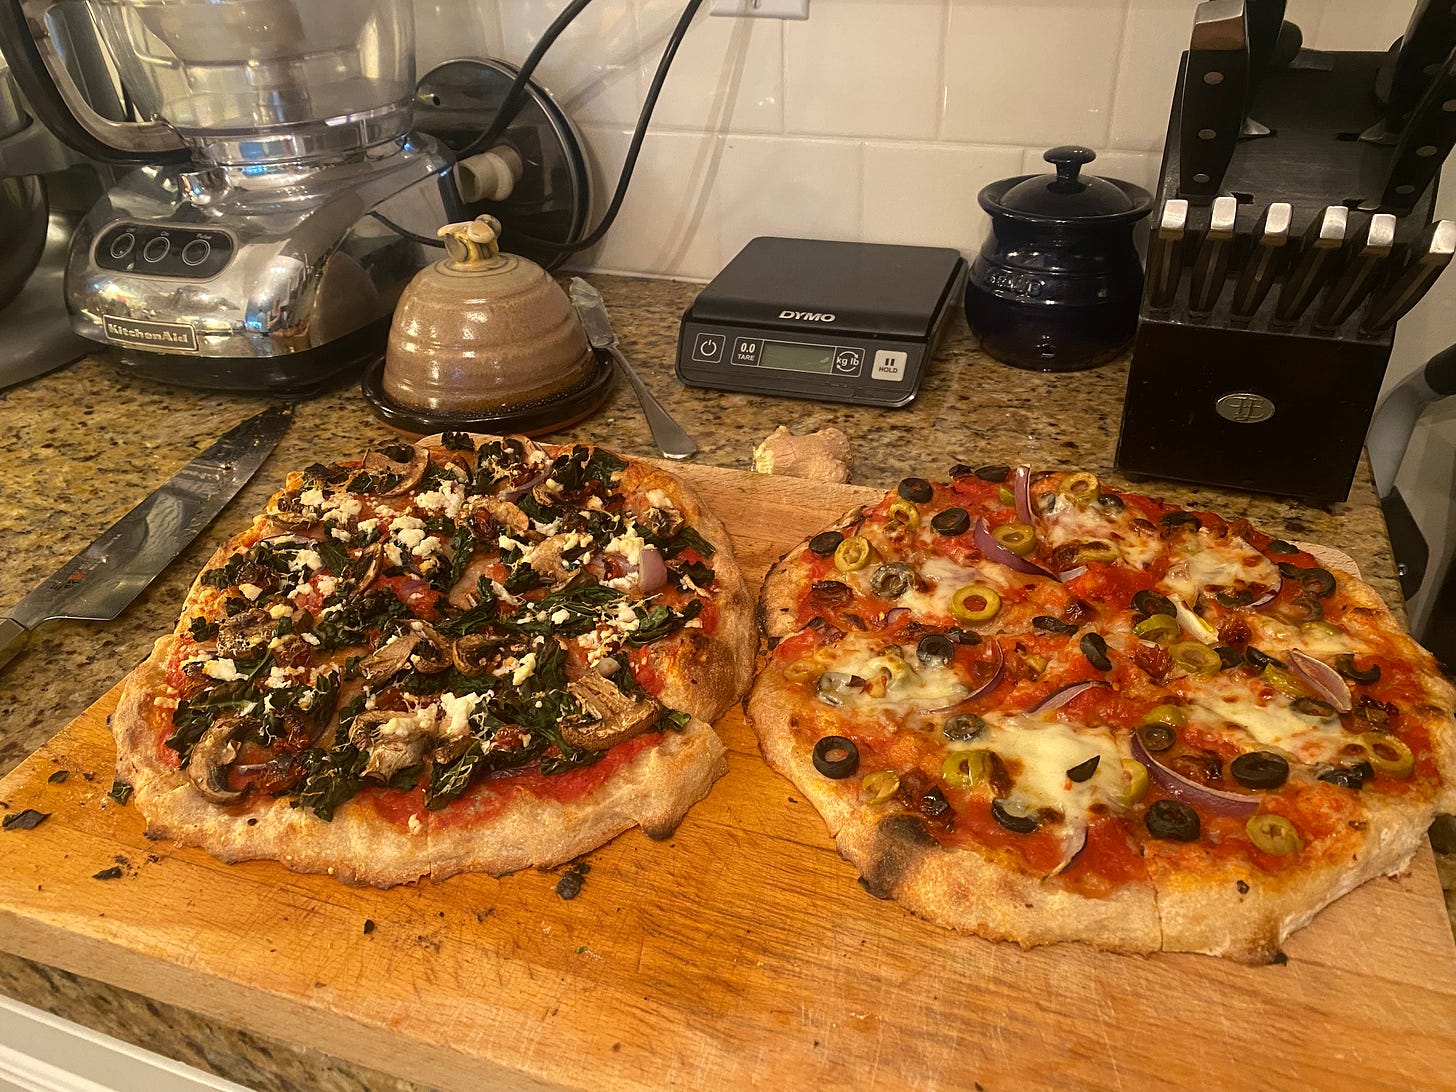 Two pizzas on a cutting board, the one on the left with kale as described above, and the one on the right with olives and fresh mozza. In the background are a butter dish, a kitchen scale, and a knife block. A large knife rests on the counter beside the cutting board.